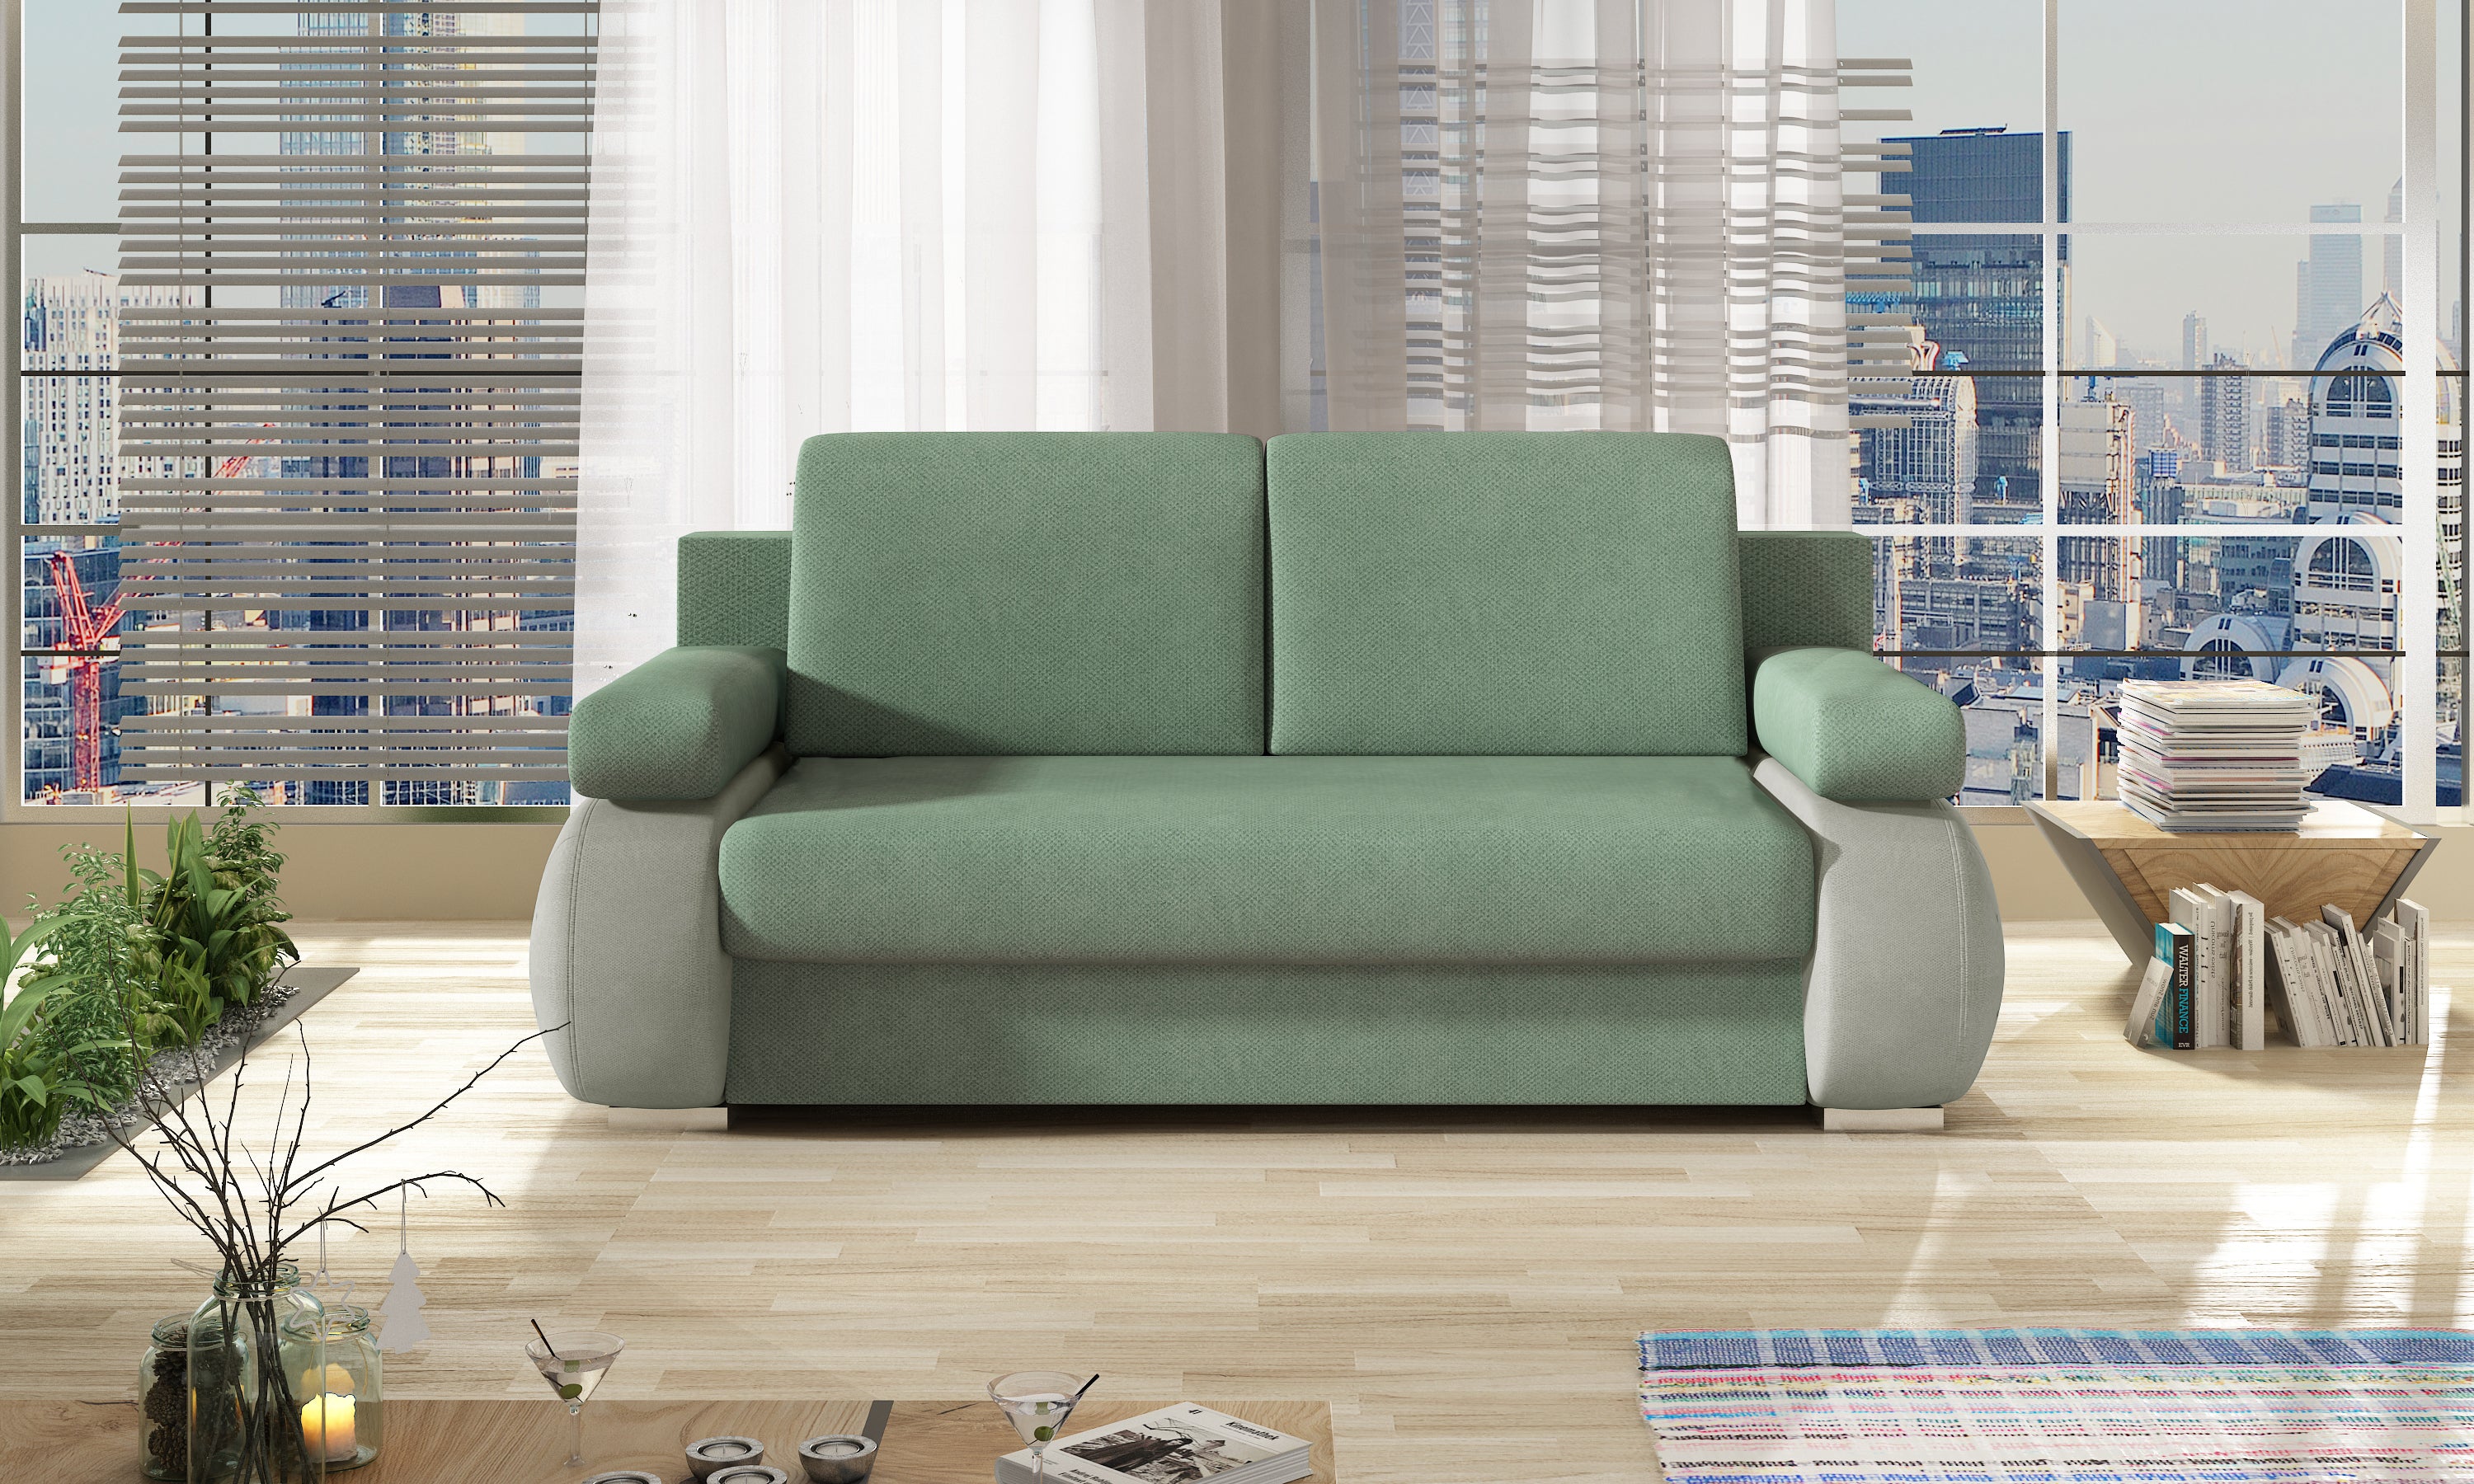 Classic sofa reinvented with modern design - Laura